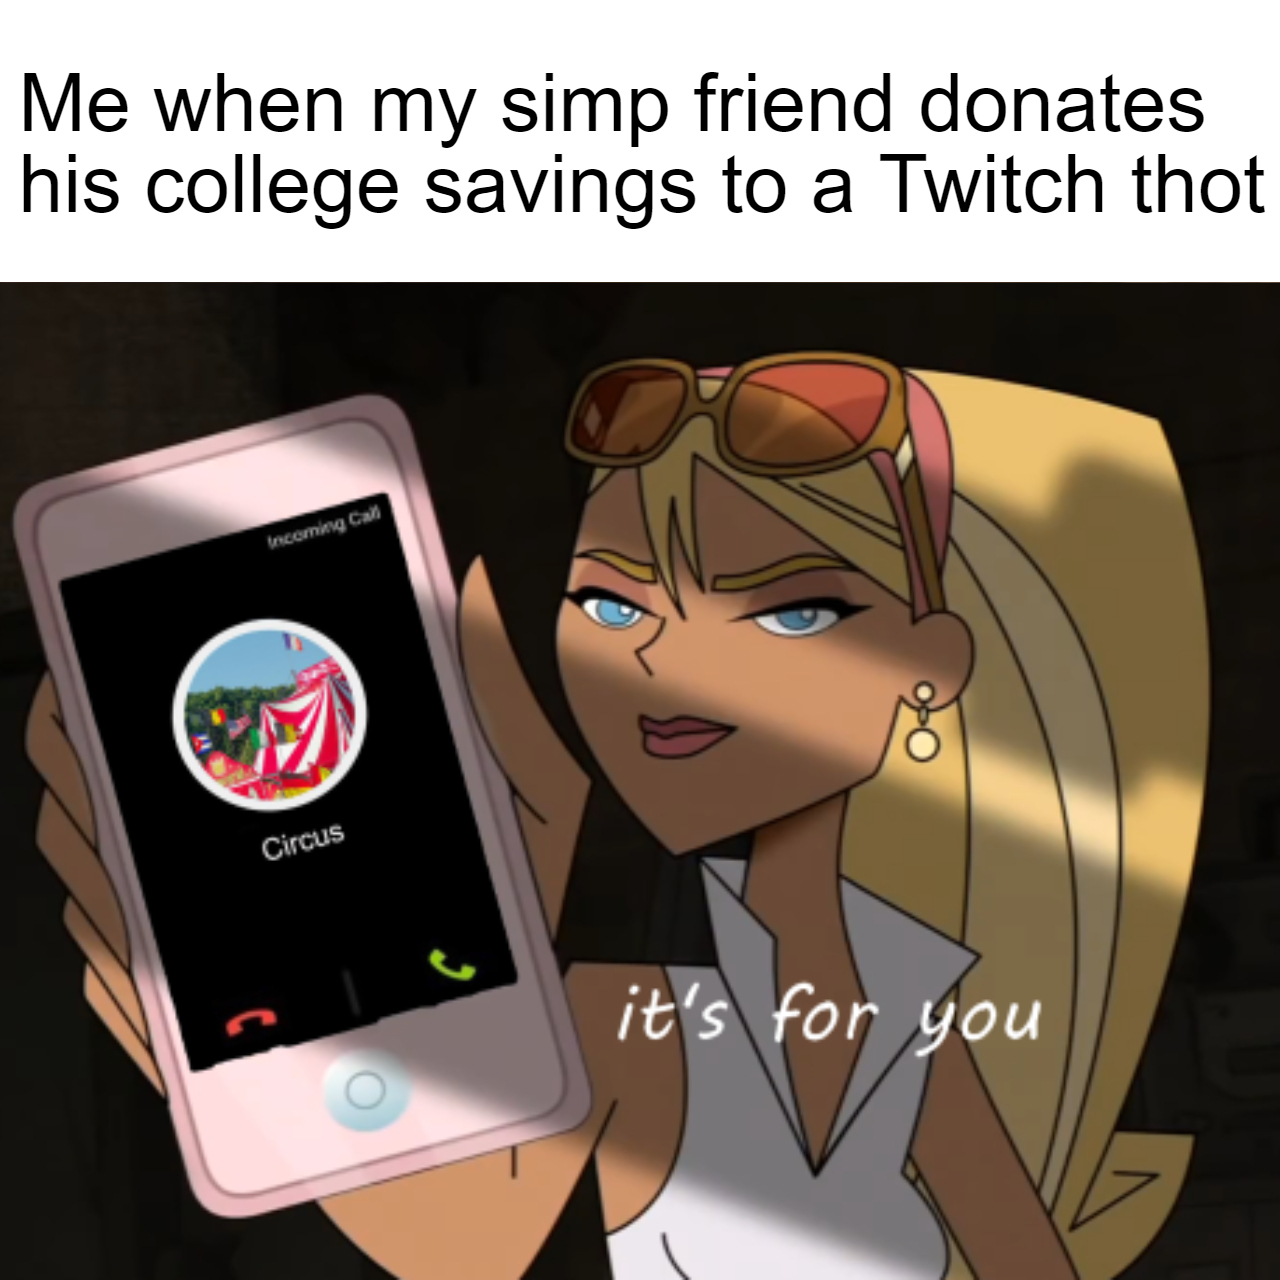 kimmie mcadams - Me when my simp friend donates his college savings to a Twitch thot com a Circus it's for you